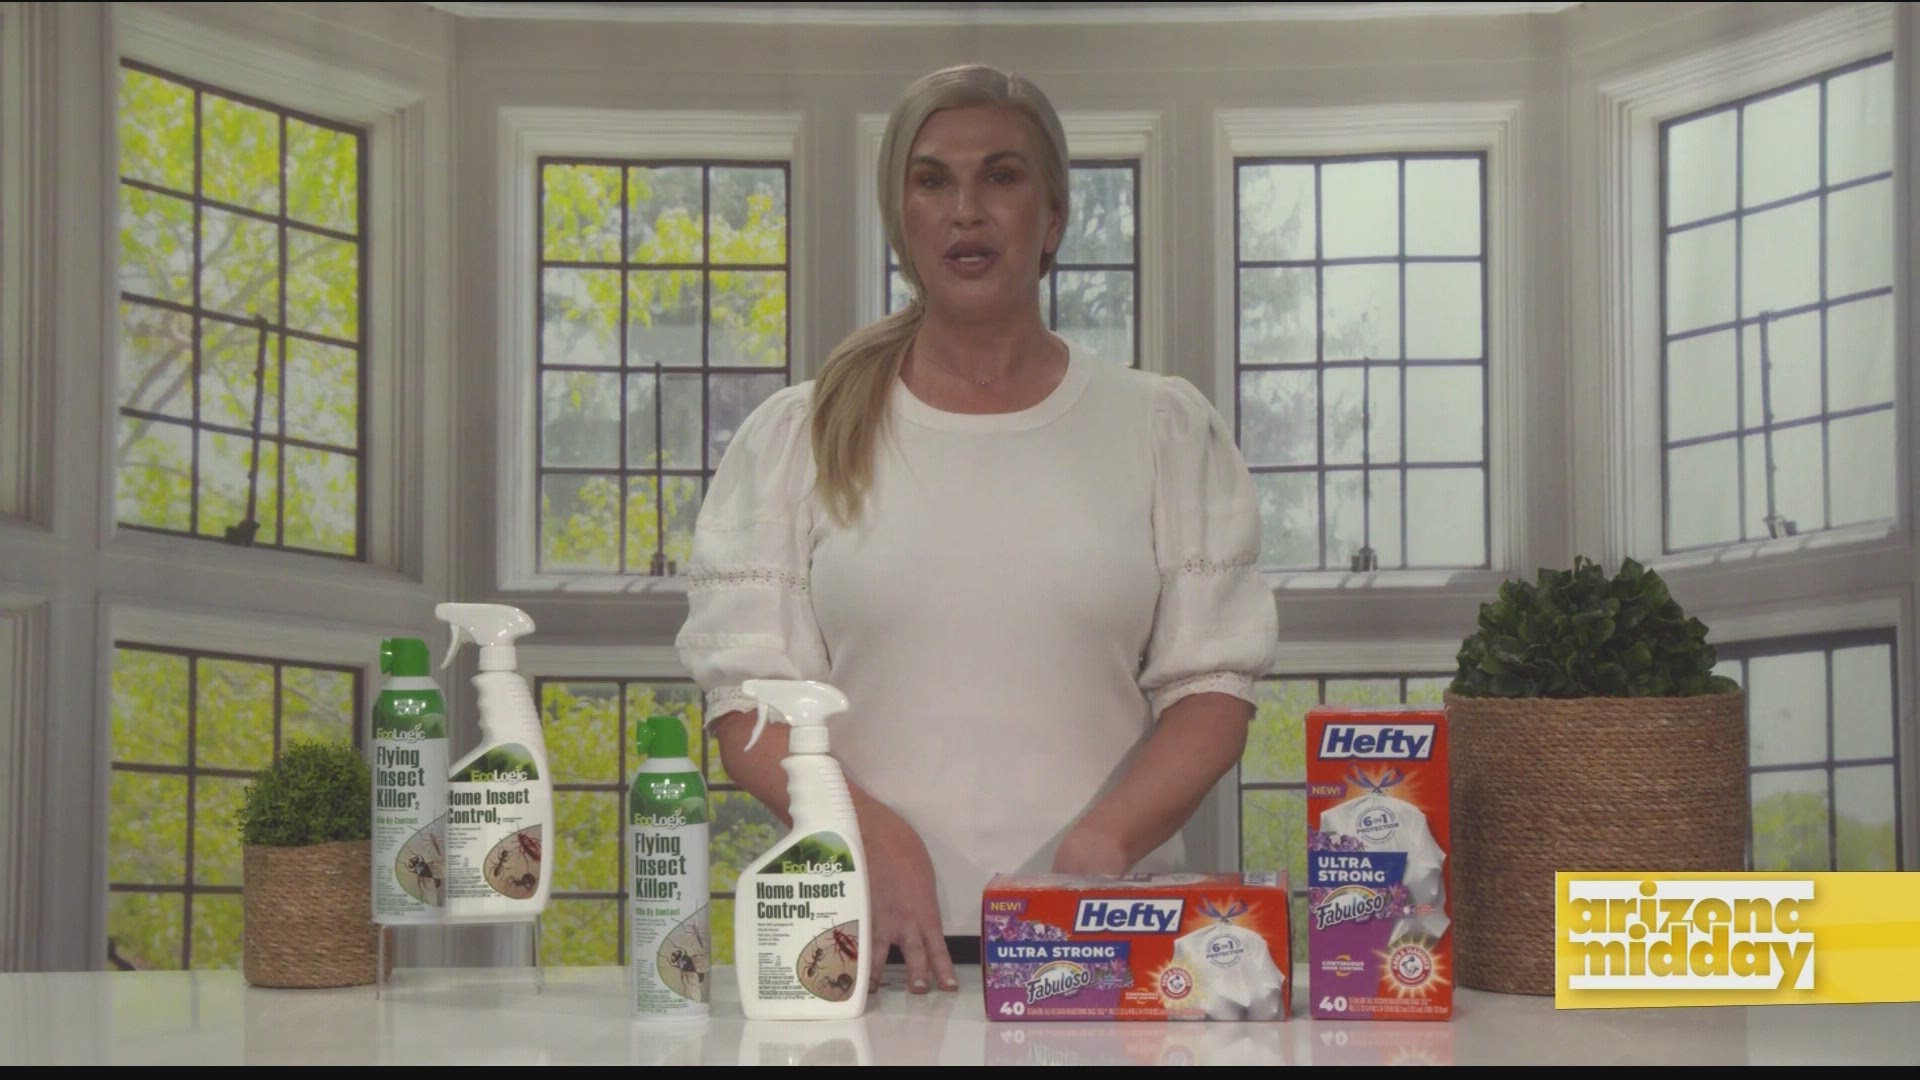 Lifestyle Expert, Kate Eckman, shows us some of the top summer home buys from Hefty & Ecologic